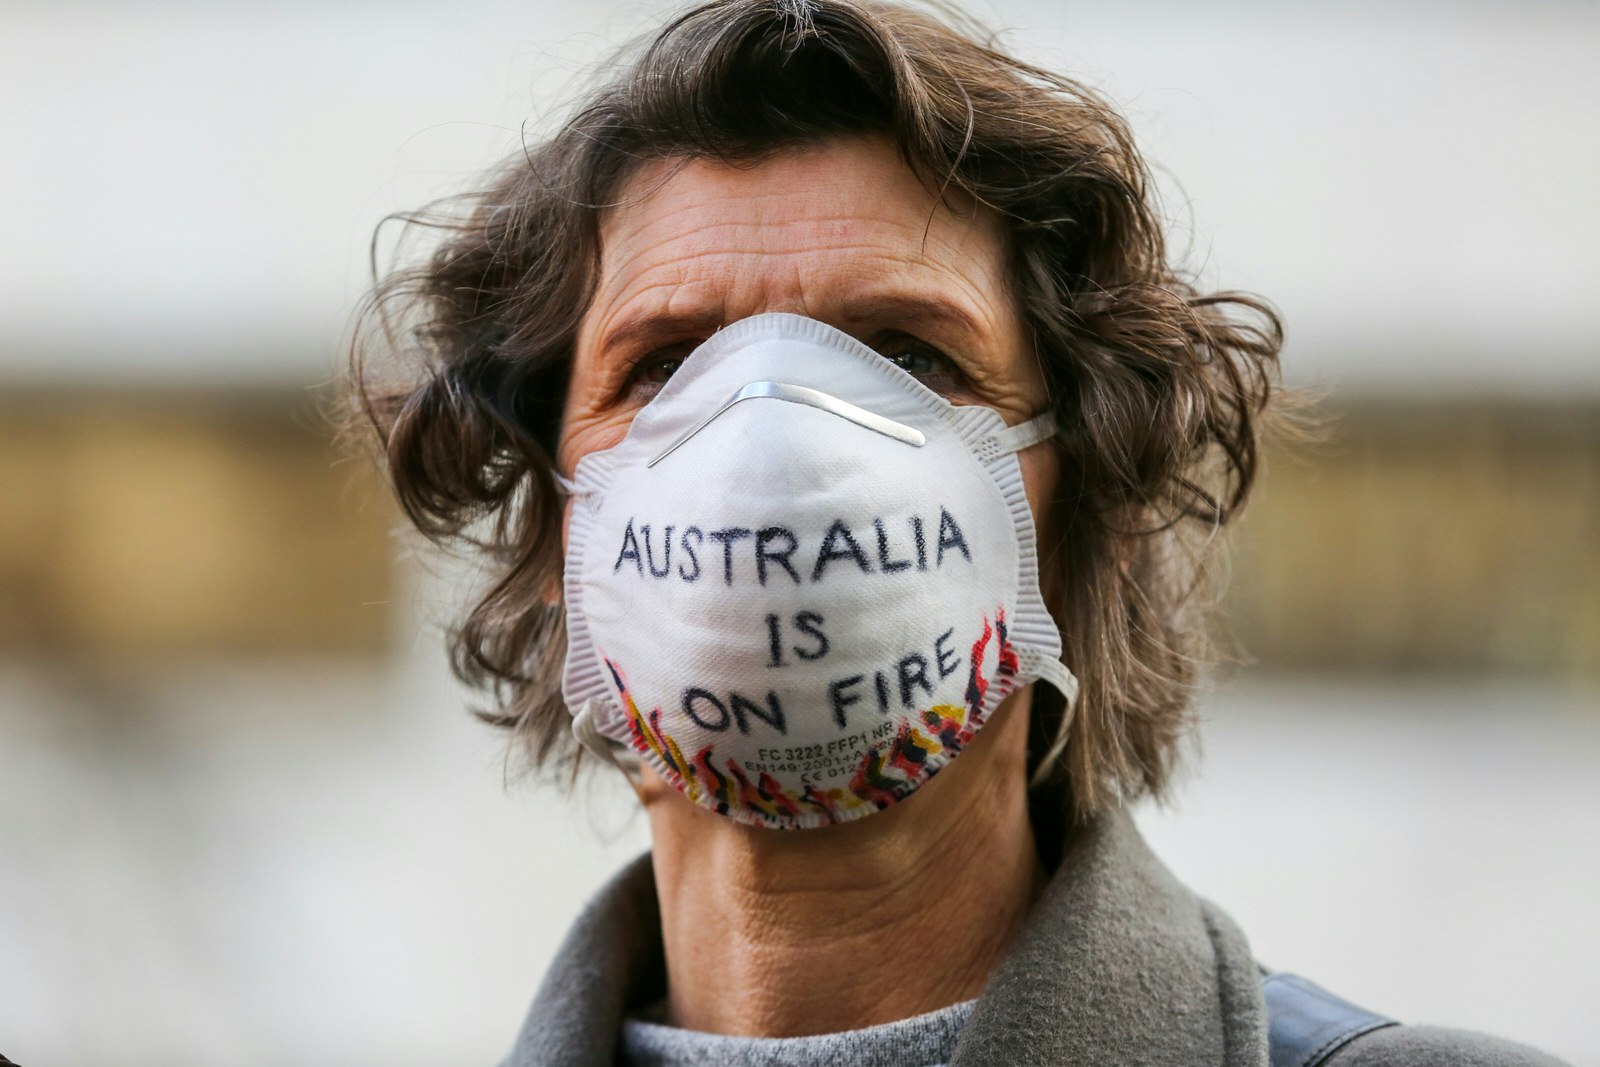 A woman wearing a white air pollution mask with 'Australia is on fire' written on it.